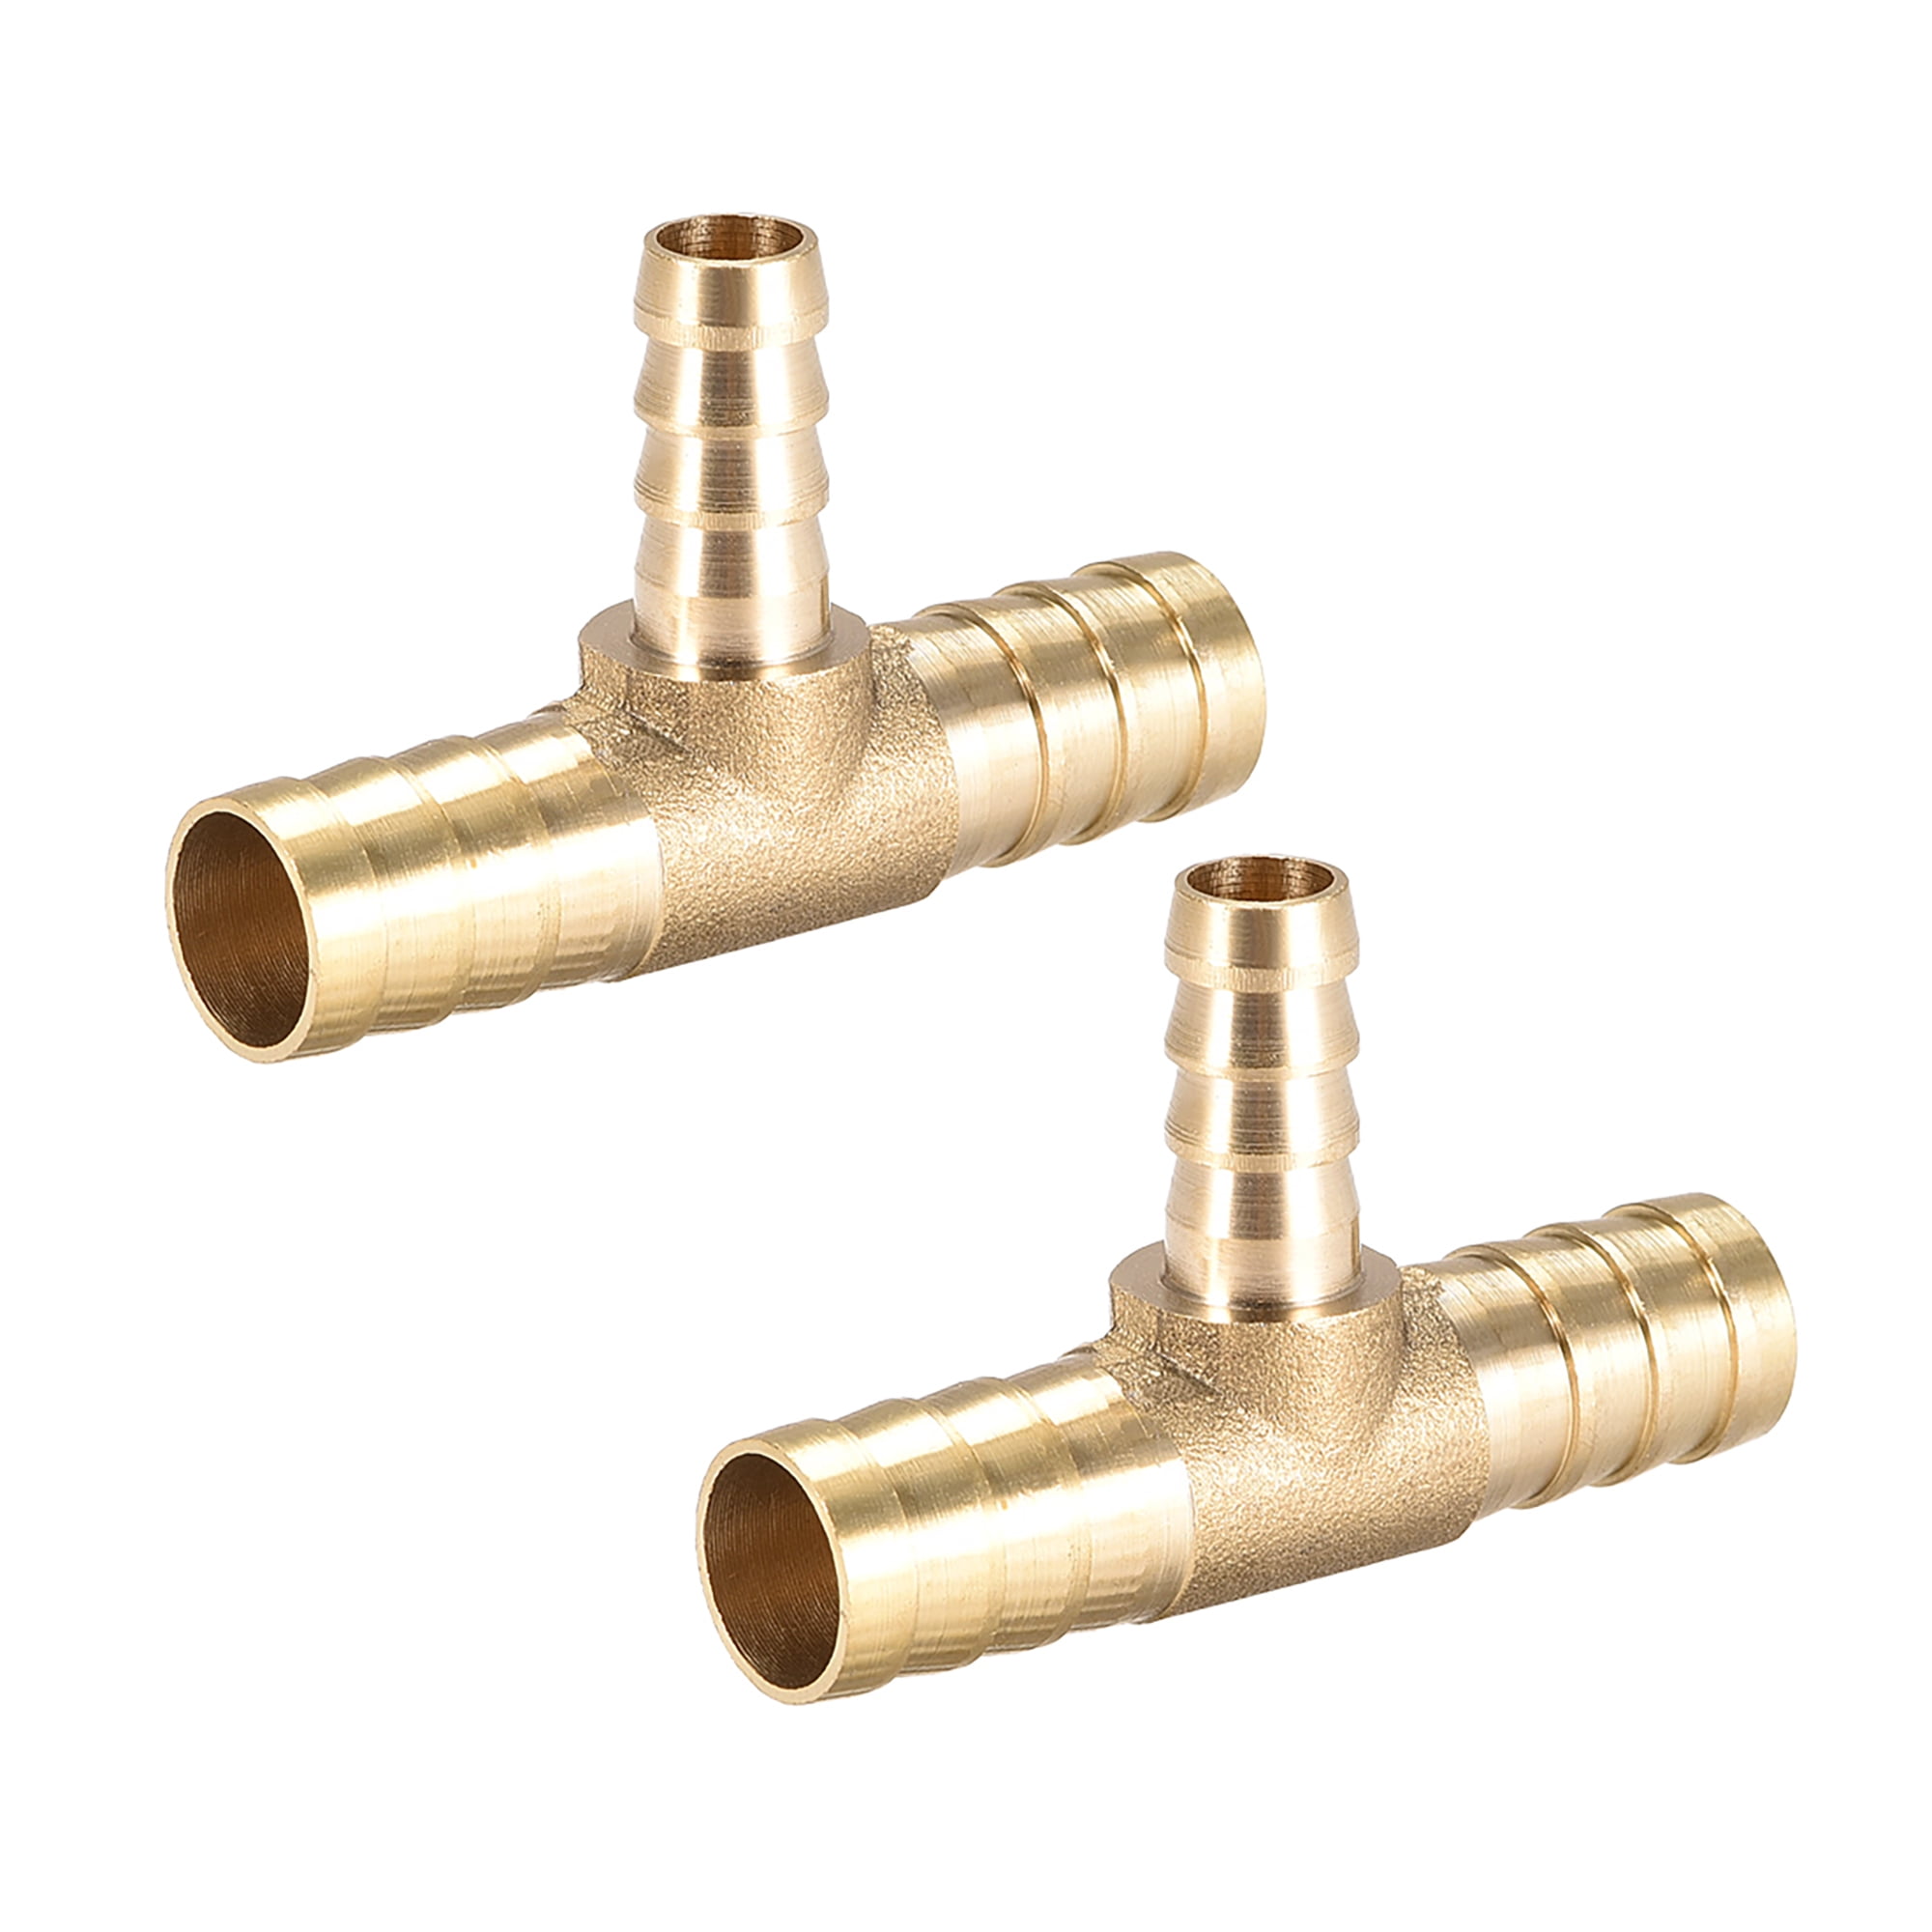 12mm-8mm-12mm Y 3Way Brass Fitting Hose Barb Reducing Fuel to <1/2" 5/16" Splice 